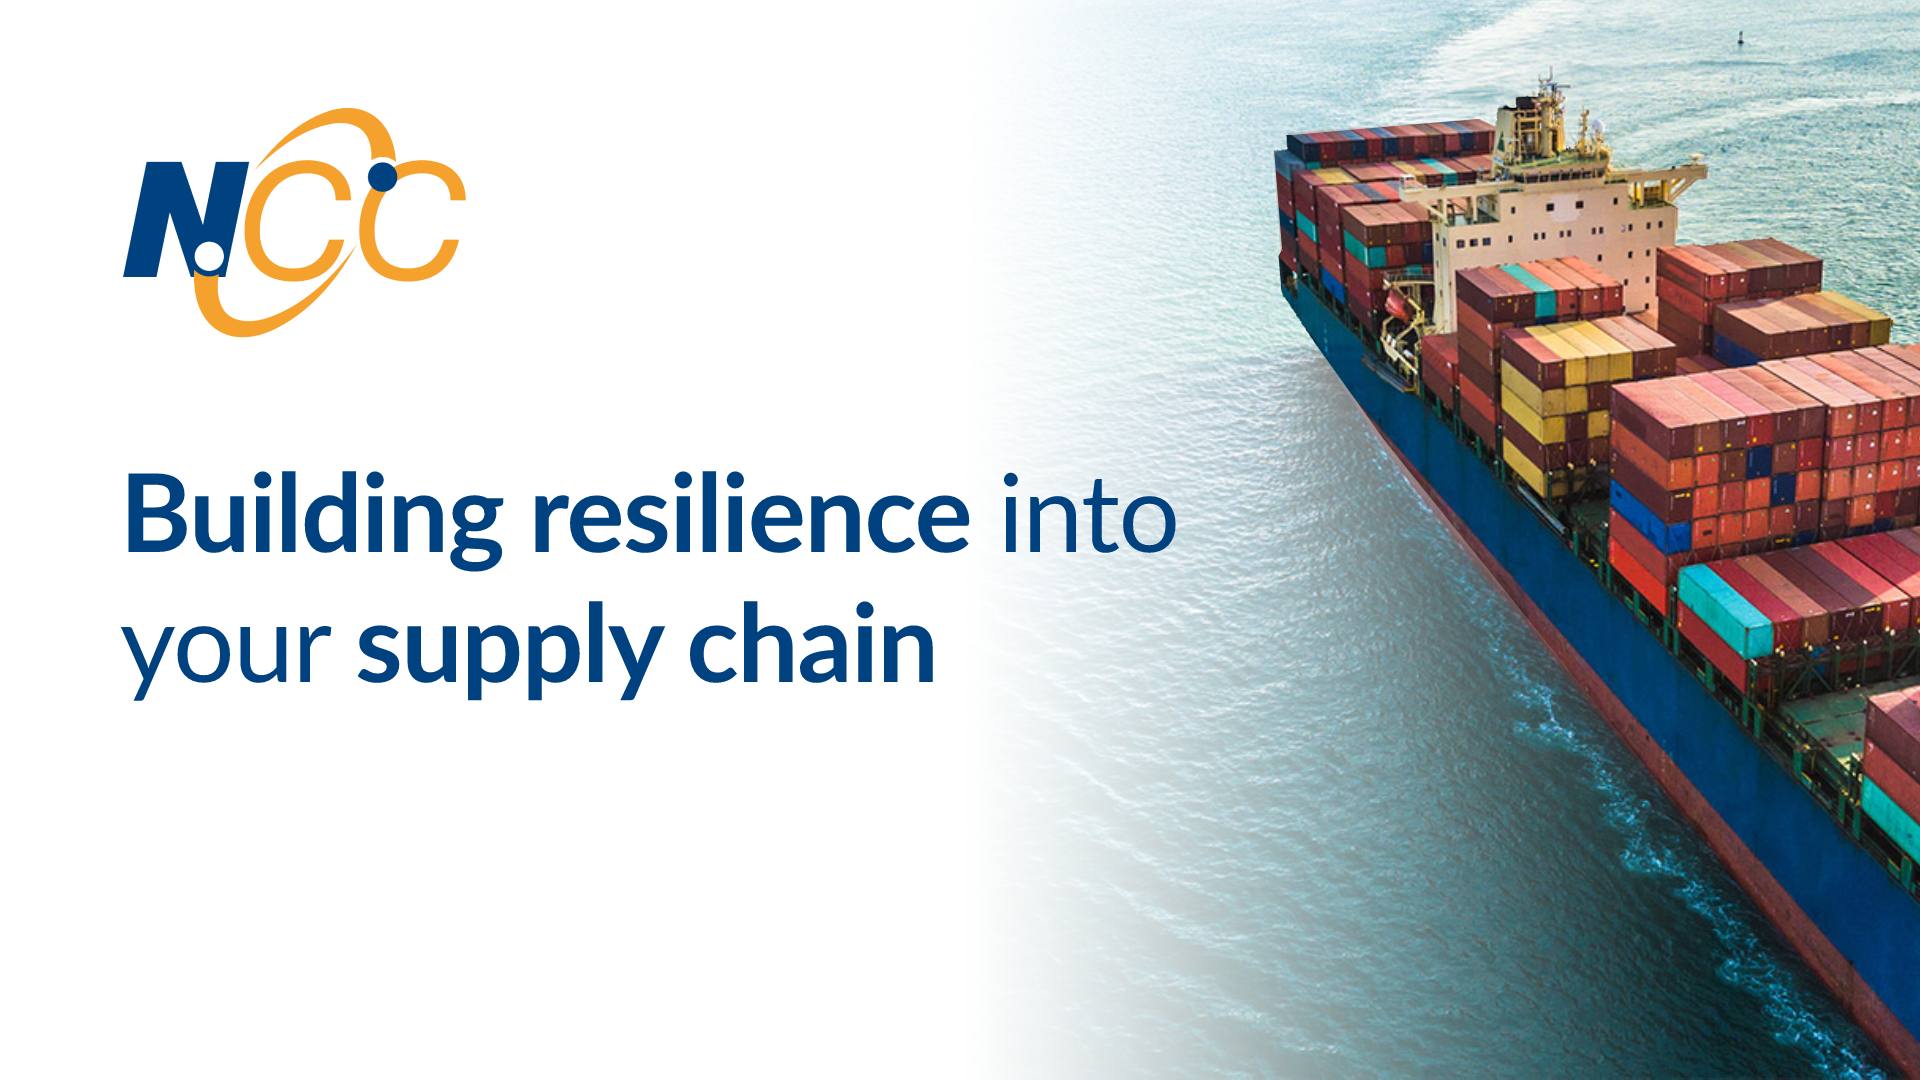 Building resilience into your supply chain